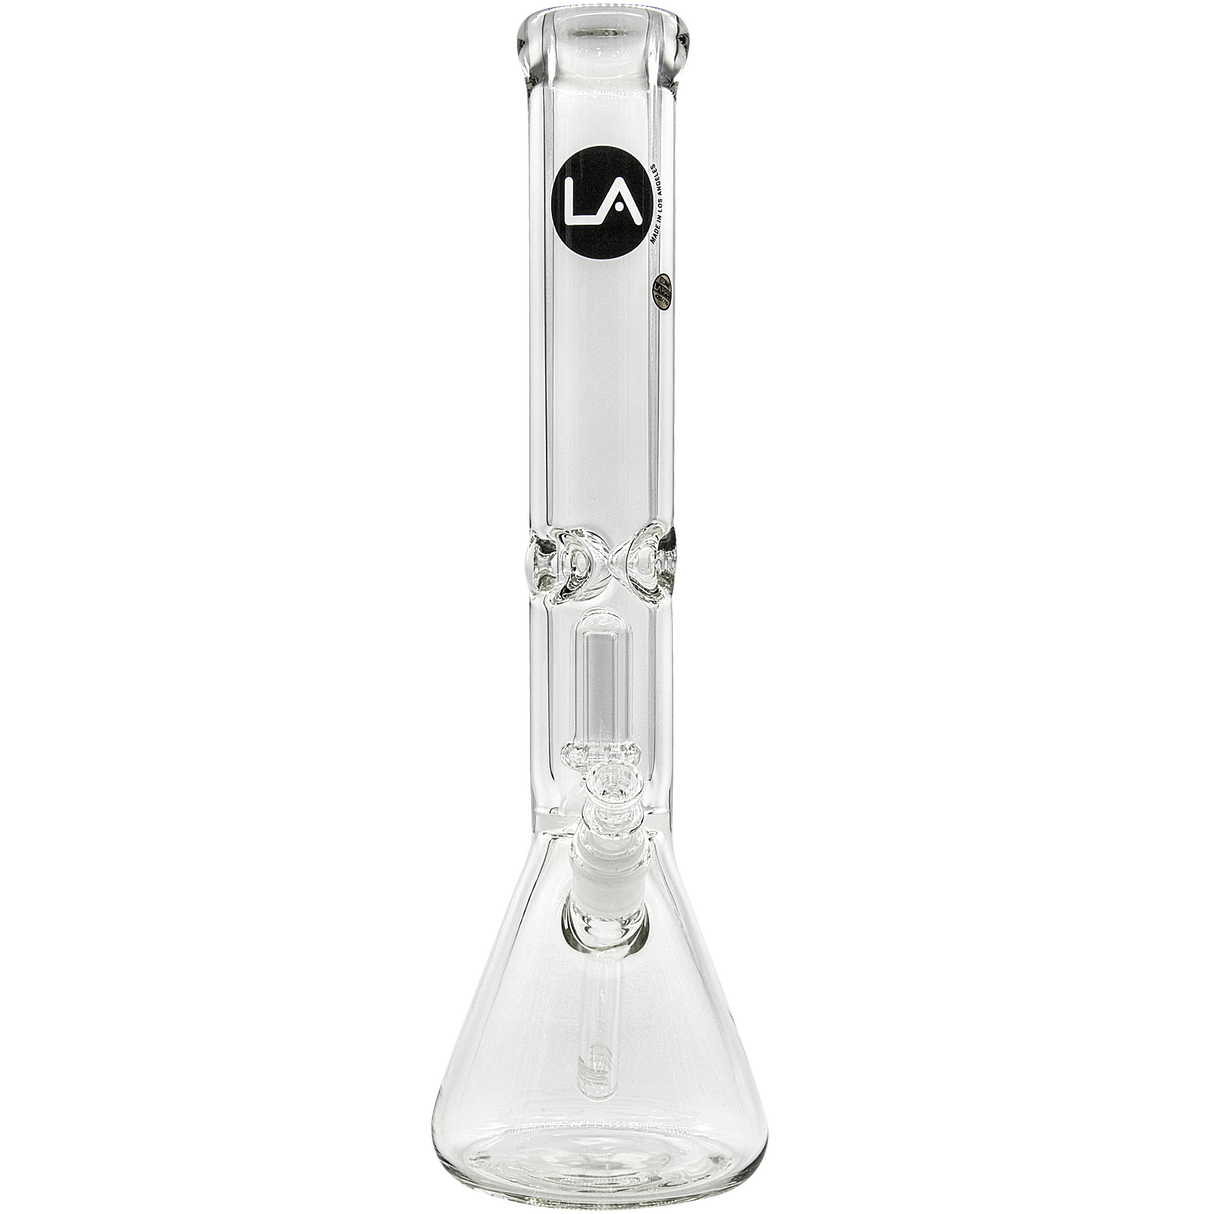 LA Pipes "King Bong" clear beaker bong with 9mm thickness and showerhead percolator front view